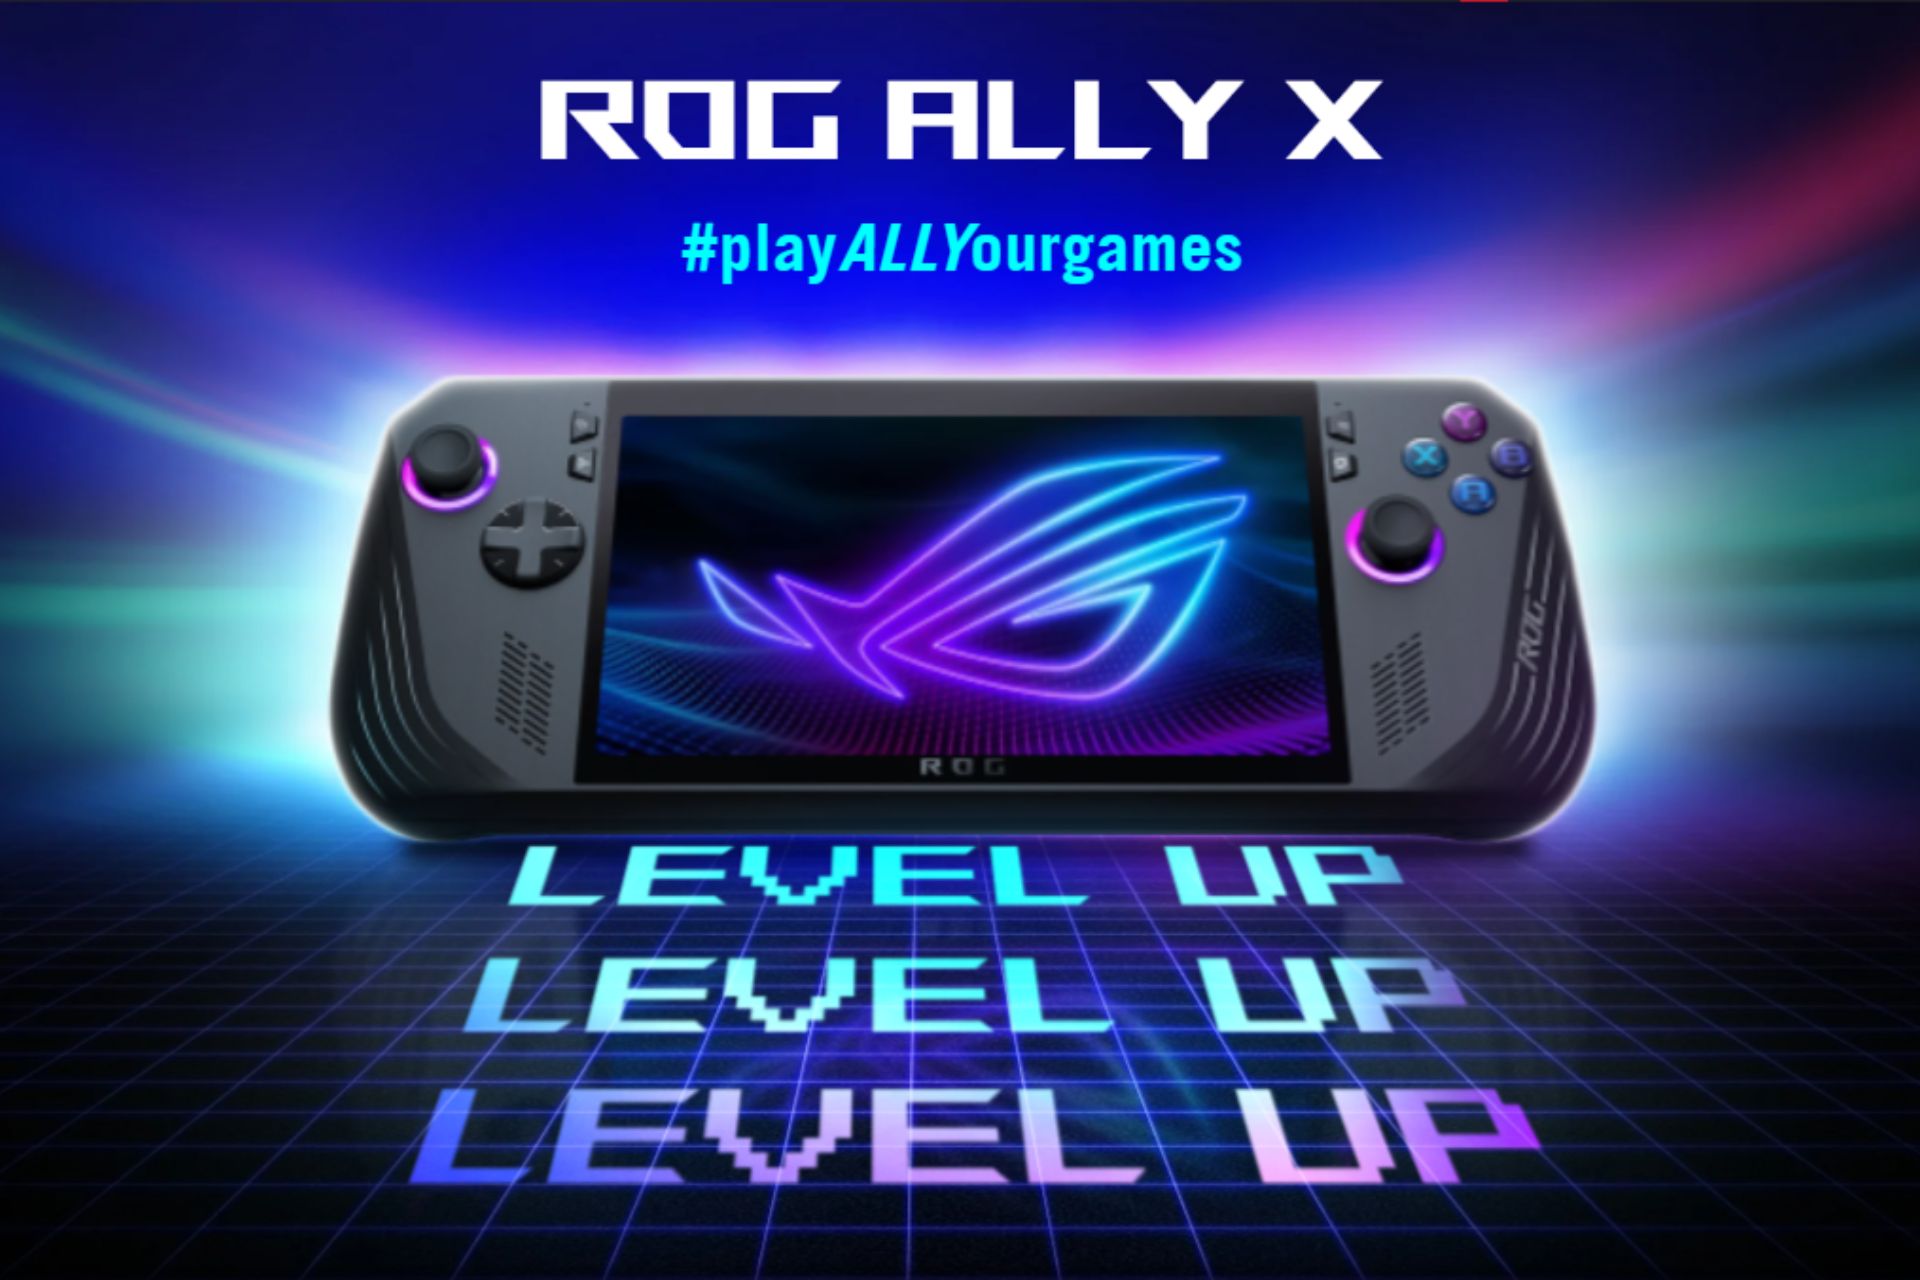 ASUS ROG Ally X is now official with 2x battery life, increased RAM & more